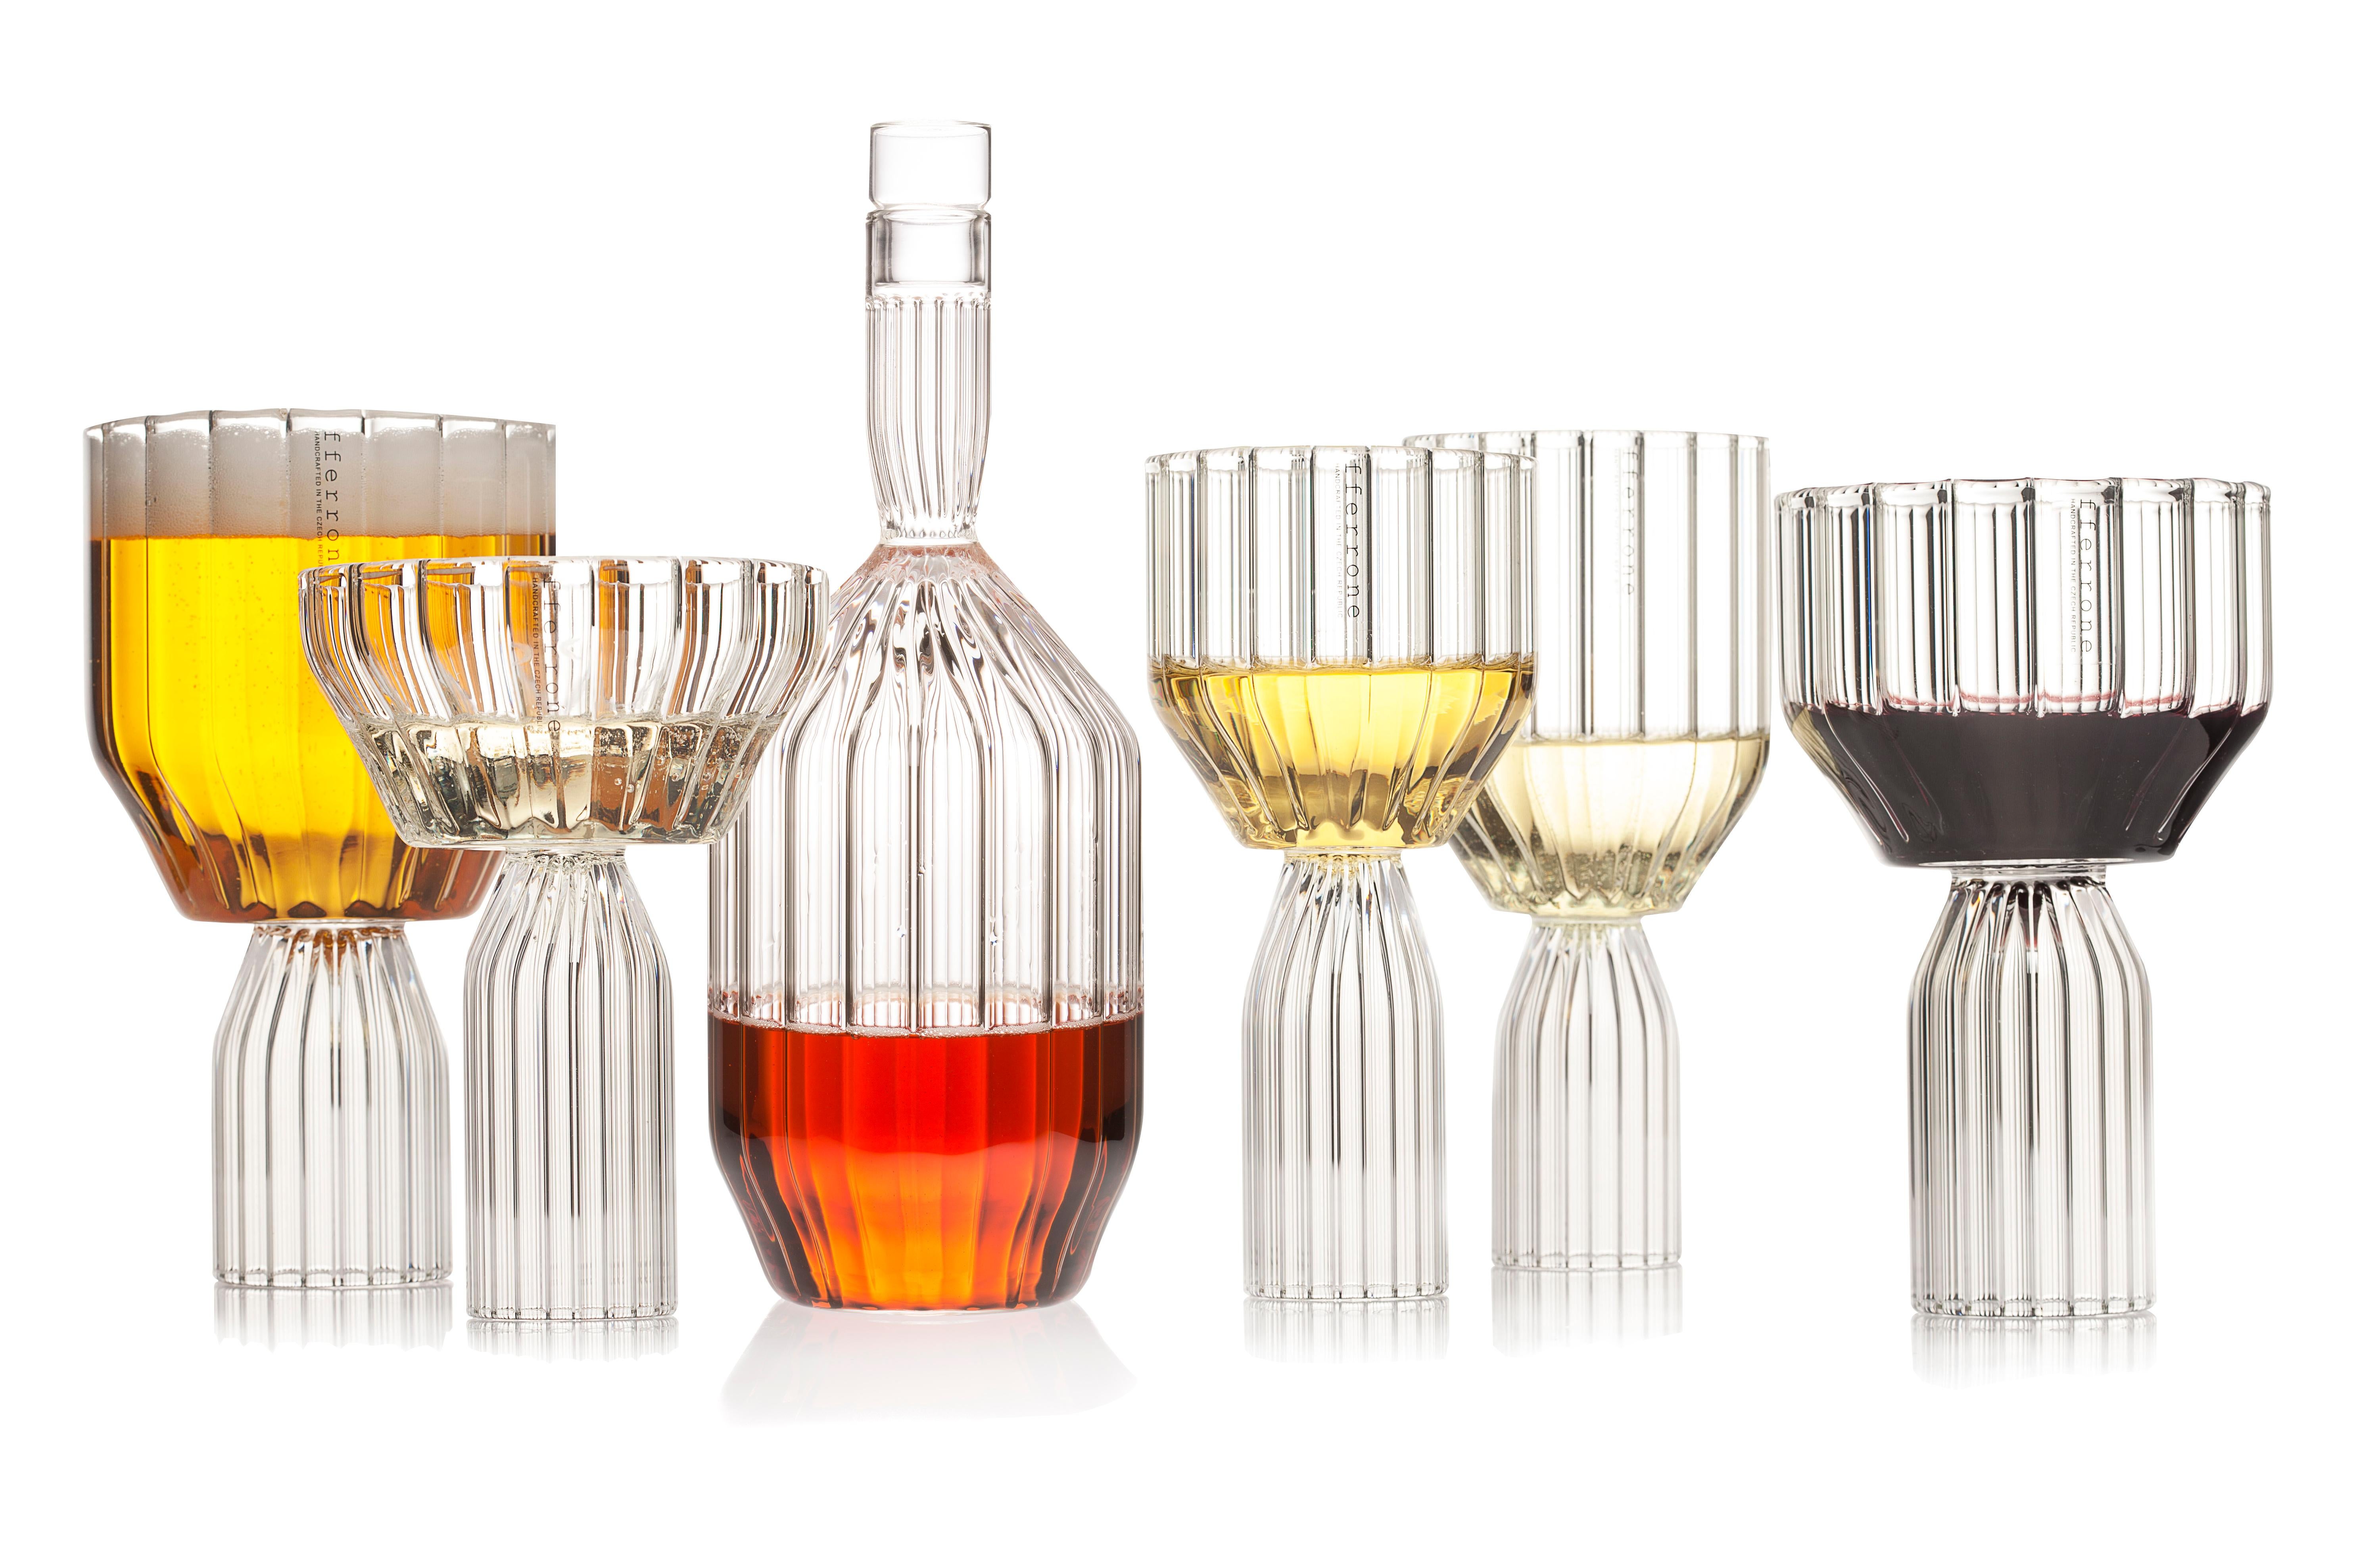 Margot champagne coupe, set of two 

This item is also available in the US.

The Margot champagne glass coupe is a contemporary glassware set which is handcrafted without the use of molds, made one by one by master craftsmen in the Czech Republic. A